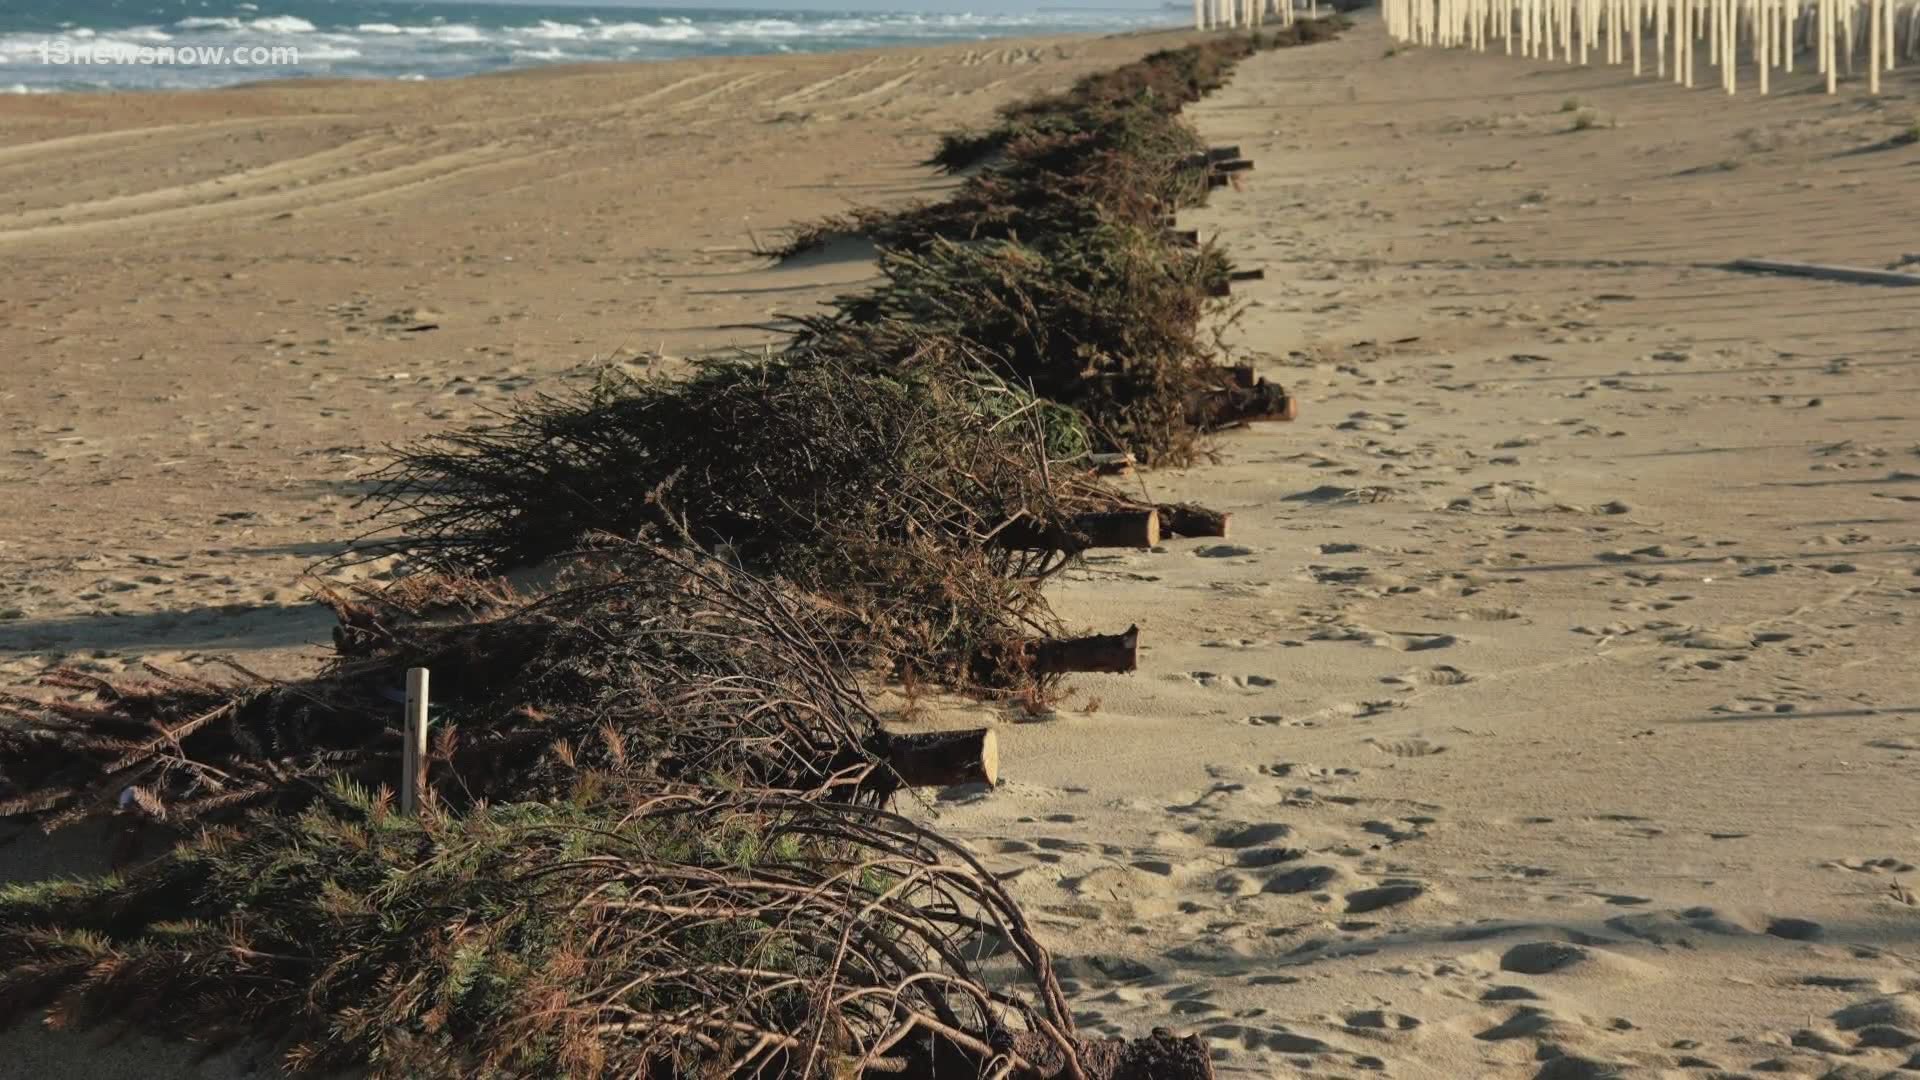 Have a Christmas tree to recycle? Chicho's Pizza is collecting people's Christmas trees that will be placed on dunes to help with beach erosion in the Outer Banks.